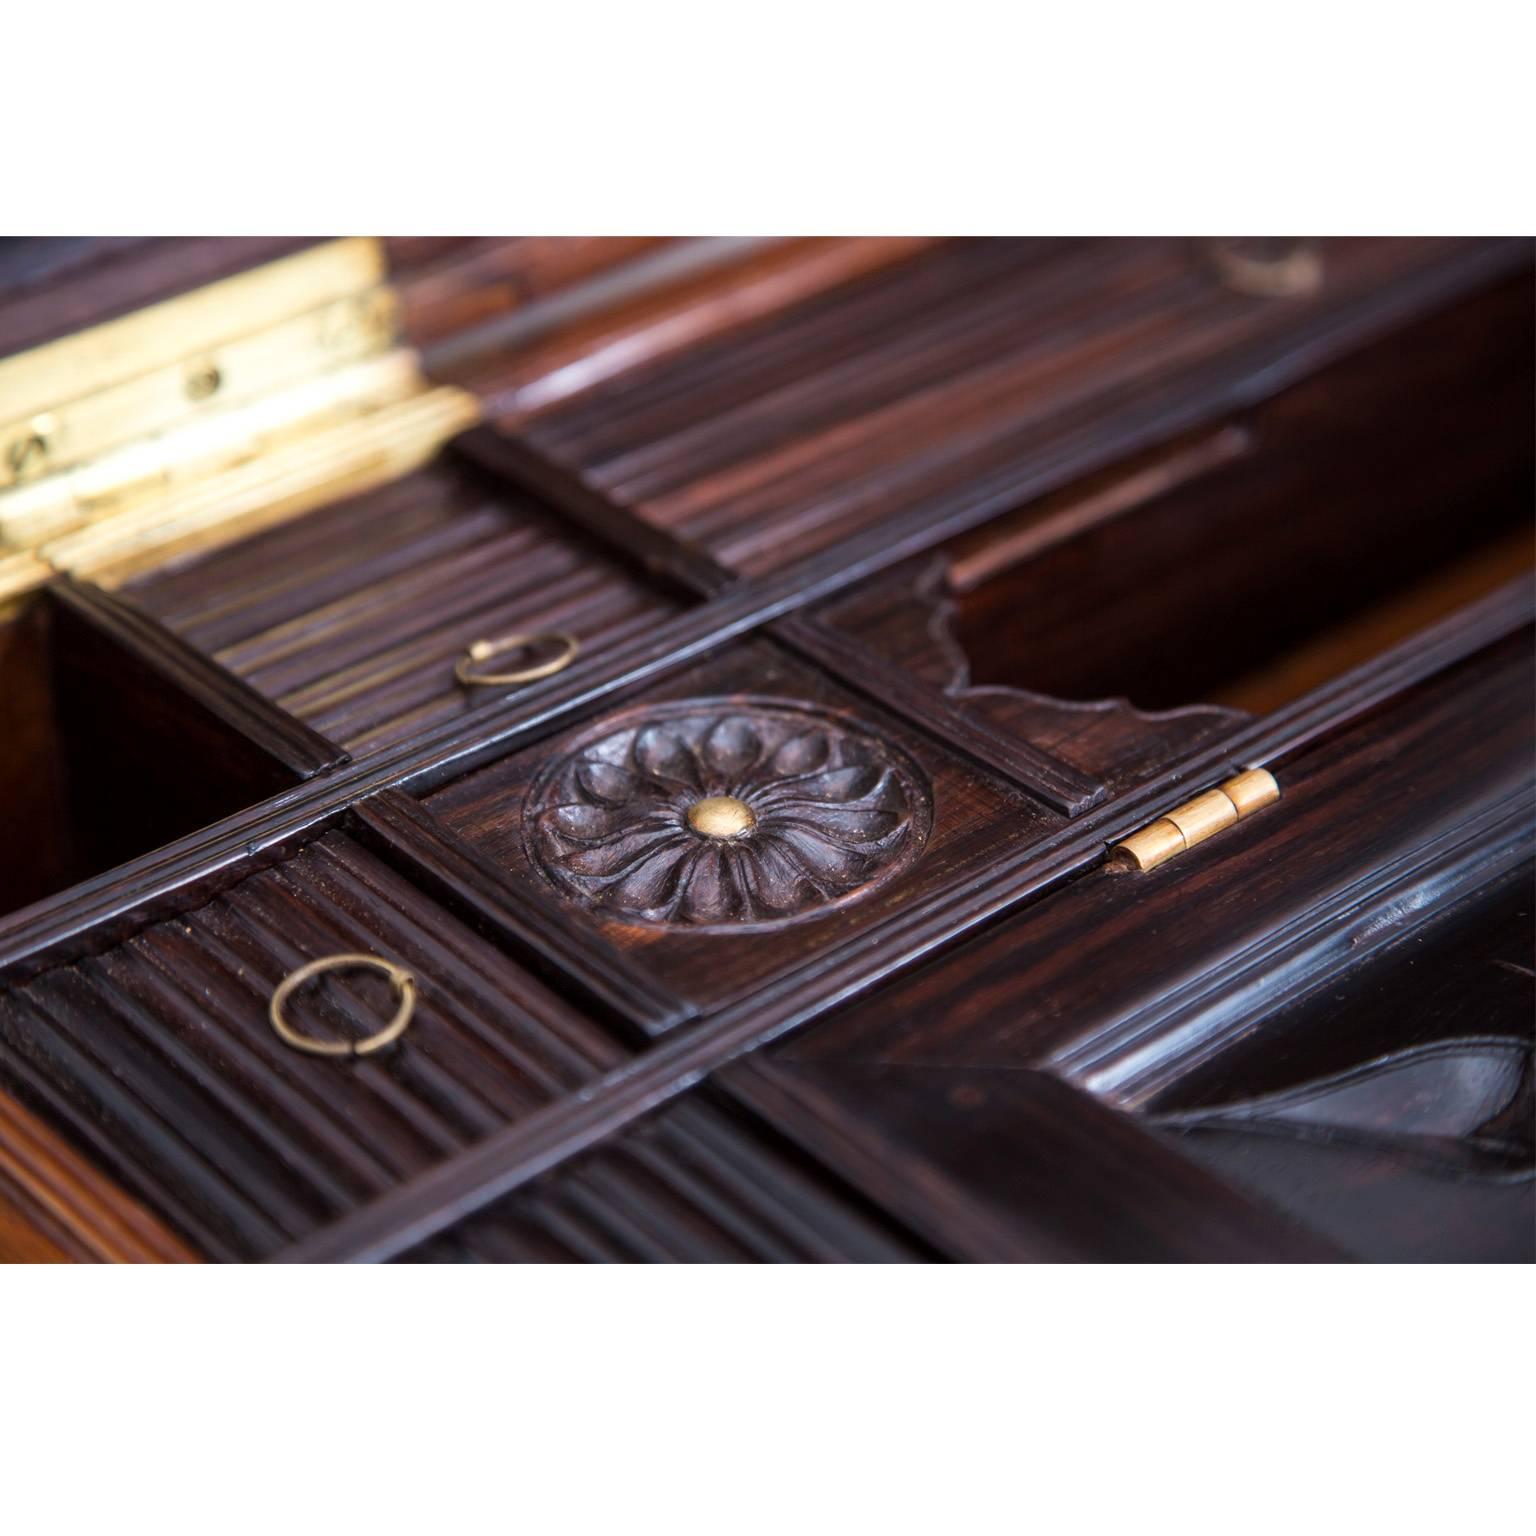 Rosewood Anglo-Indian or British Colonial Teakwood Writing Box